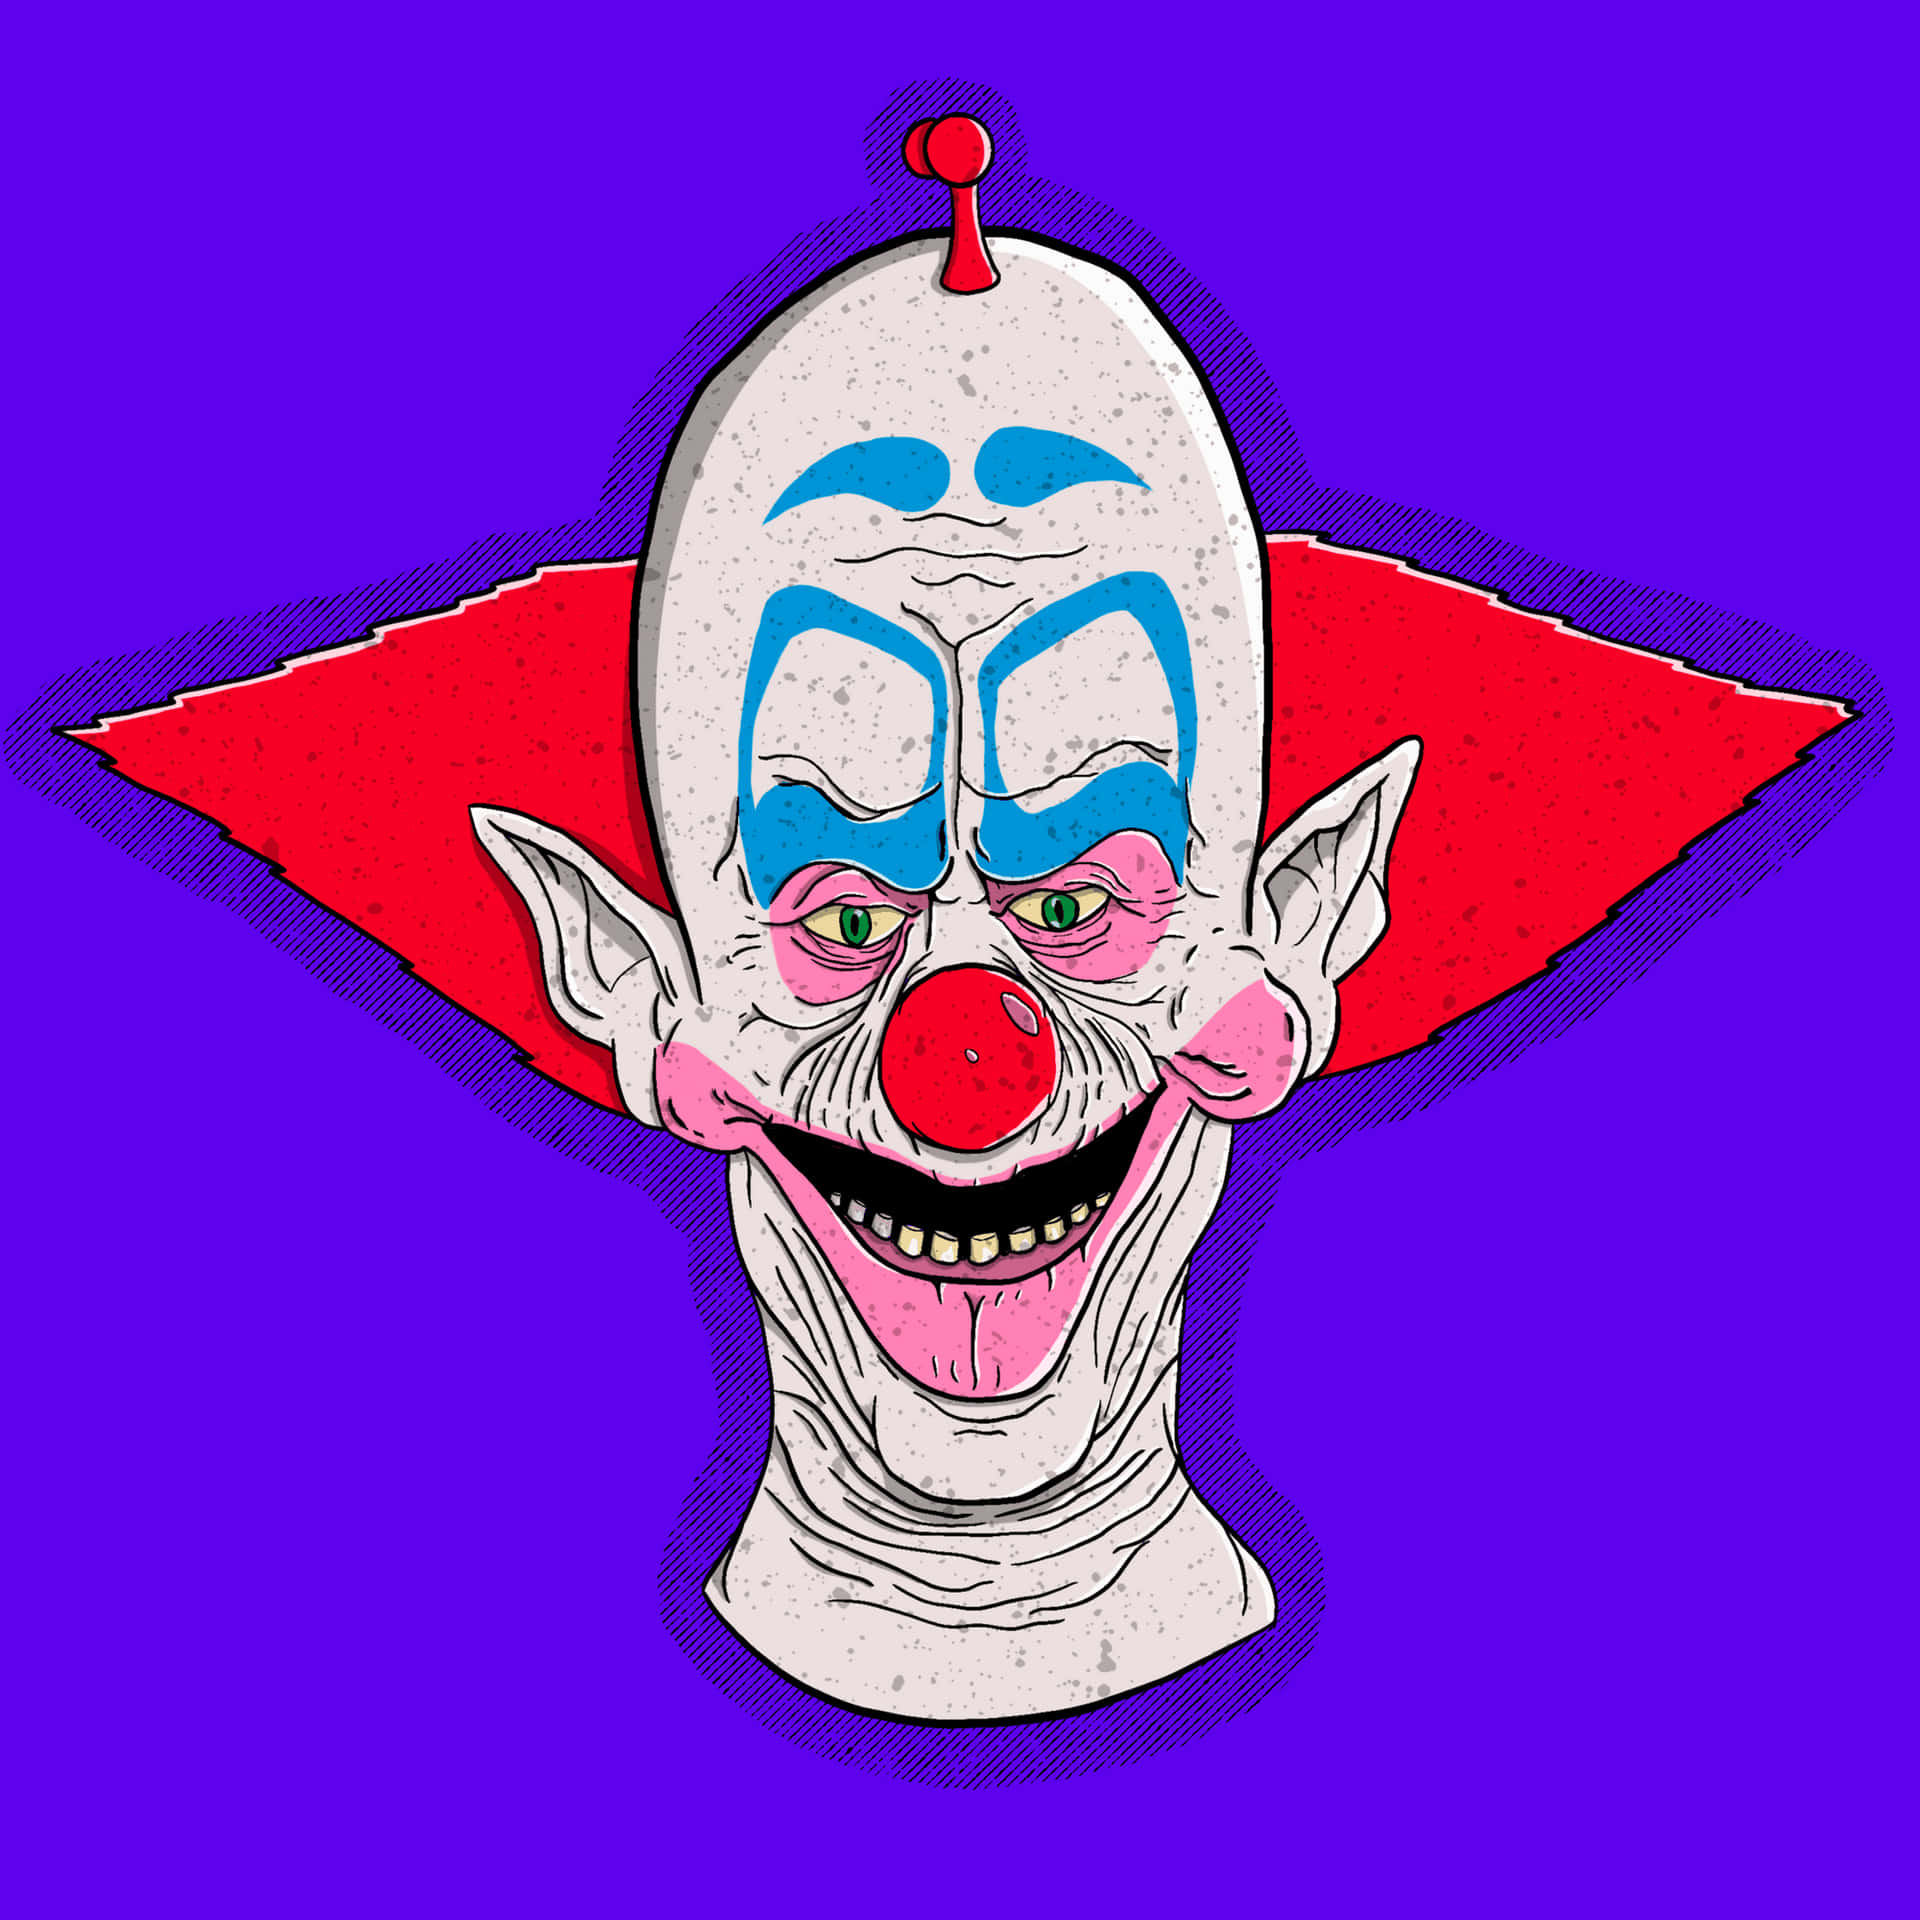 Download Killer Klowns From Outer Space Wallpaper | Wallpapers.com